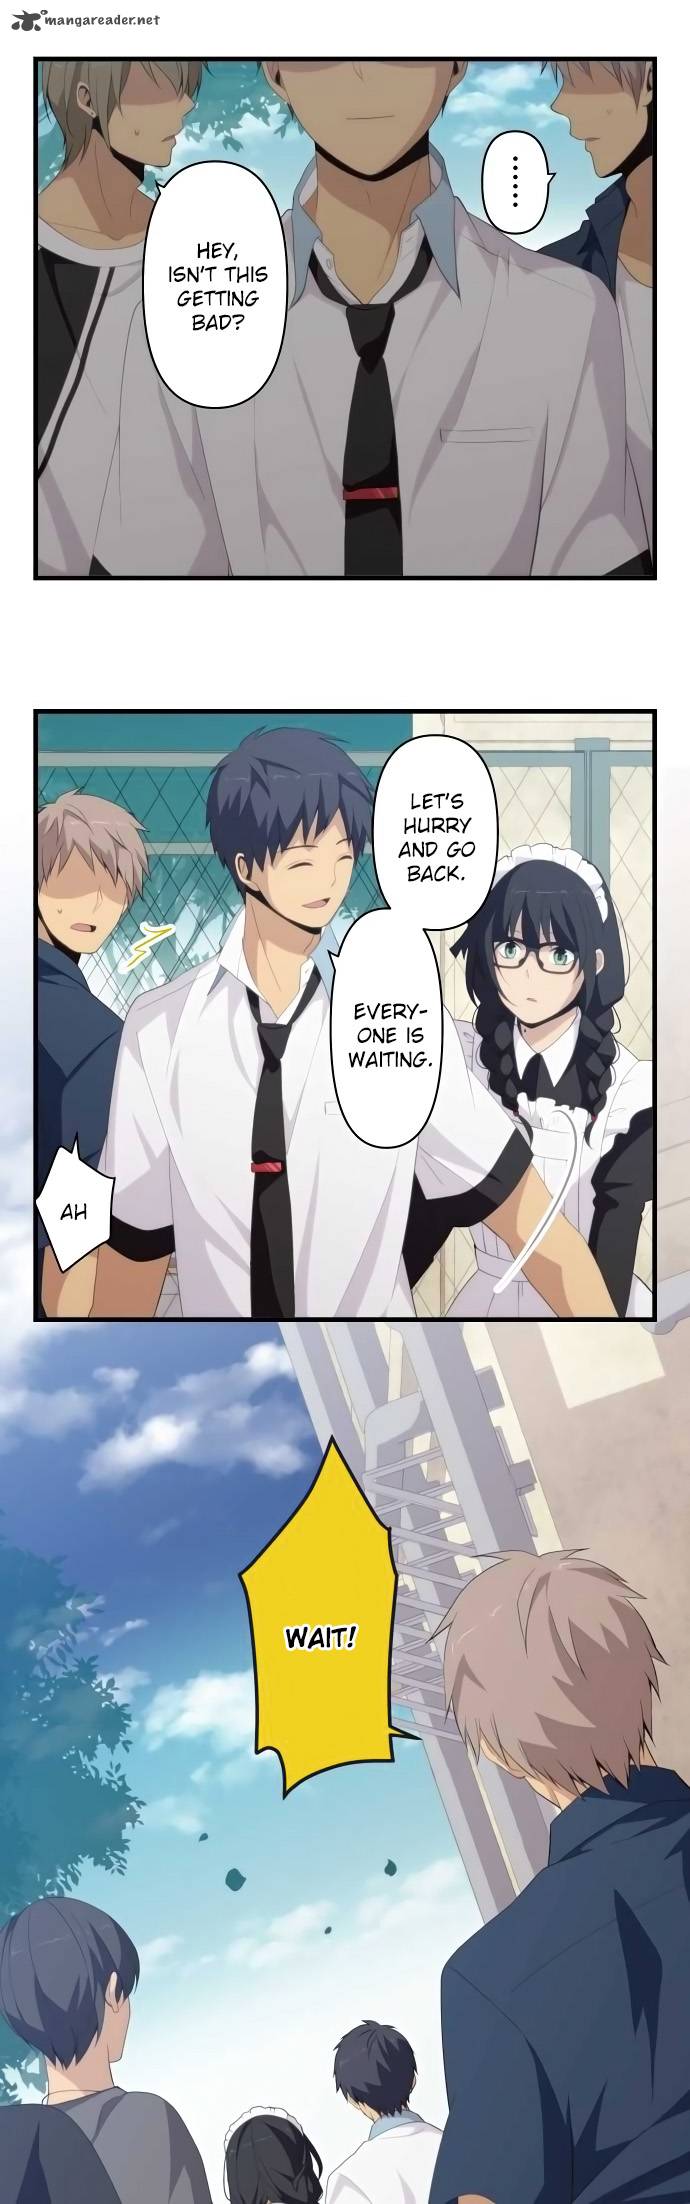 Relife 147 17